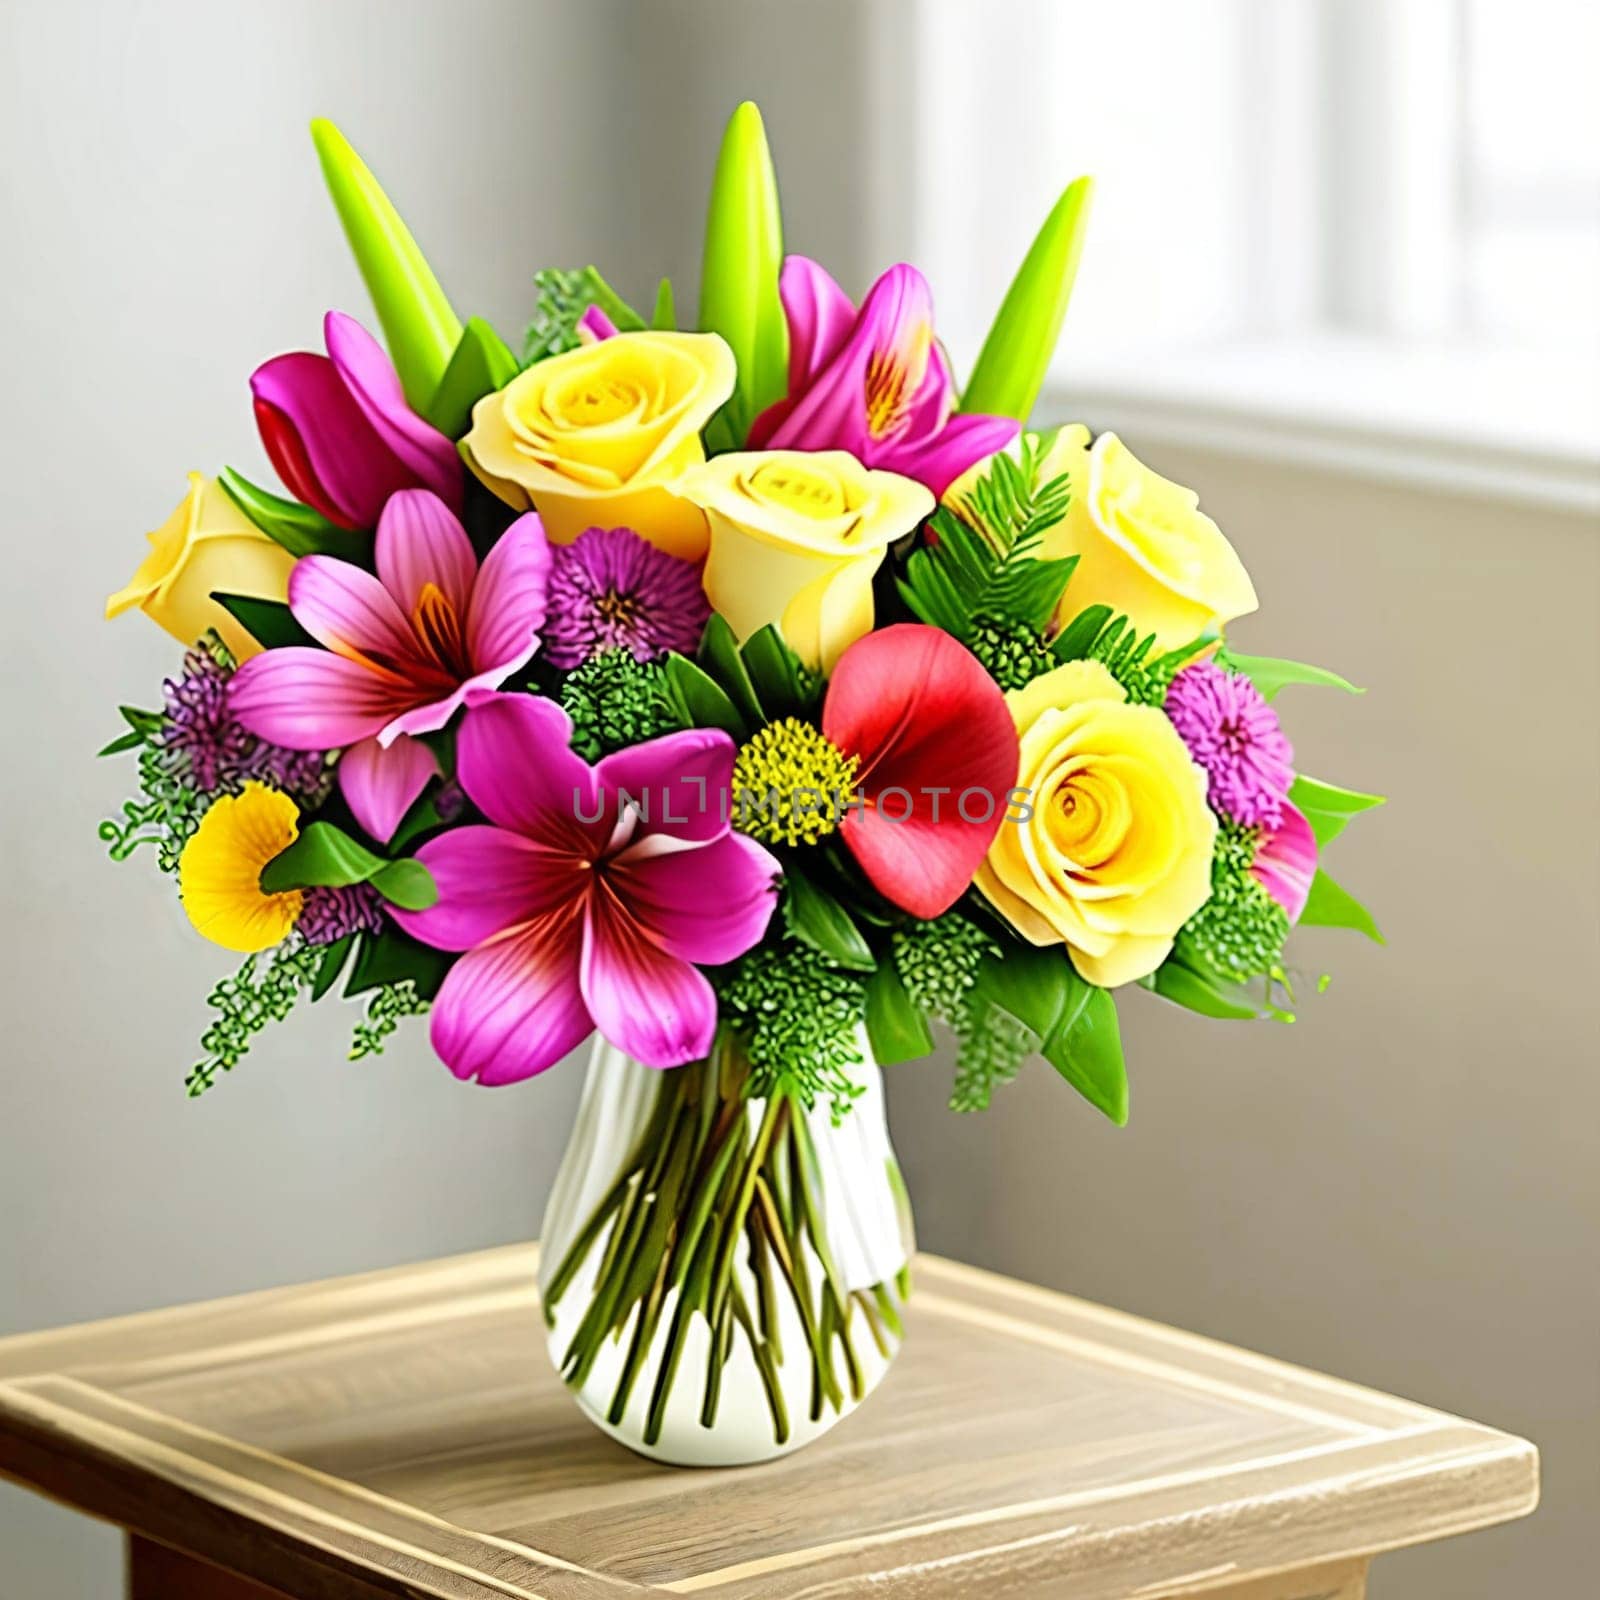 Floral Elegance. A vibrant bouquet of spring flowers arranged in a stylish vase with soft natural lighting to symbolize elegance and femininity